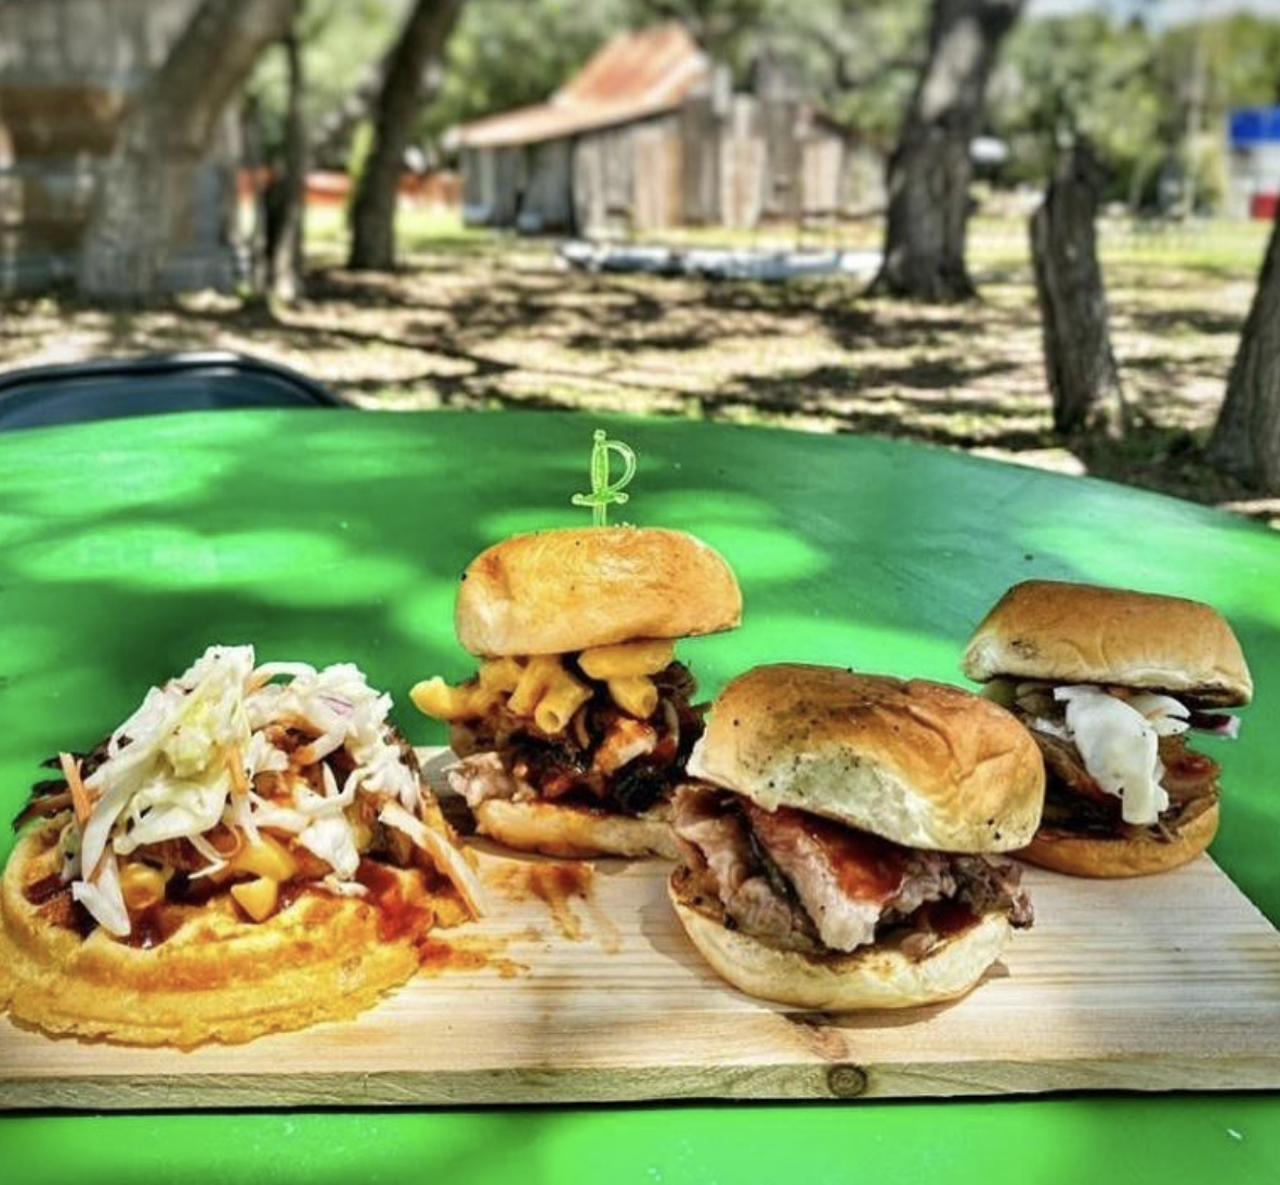 Smokey Boys Barbecue
9599 Braun Rd., (210) 842-0288, smokeyboysbarbecue.com
This veteran-owned and -operated barbecue outfit not only smokes meats to perfection at a Northwest SA food truck park, it doles out bottle sauces for at-home indulging, too.  
Photo via Instagram / smokeyboysbarbecue